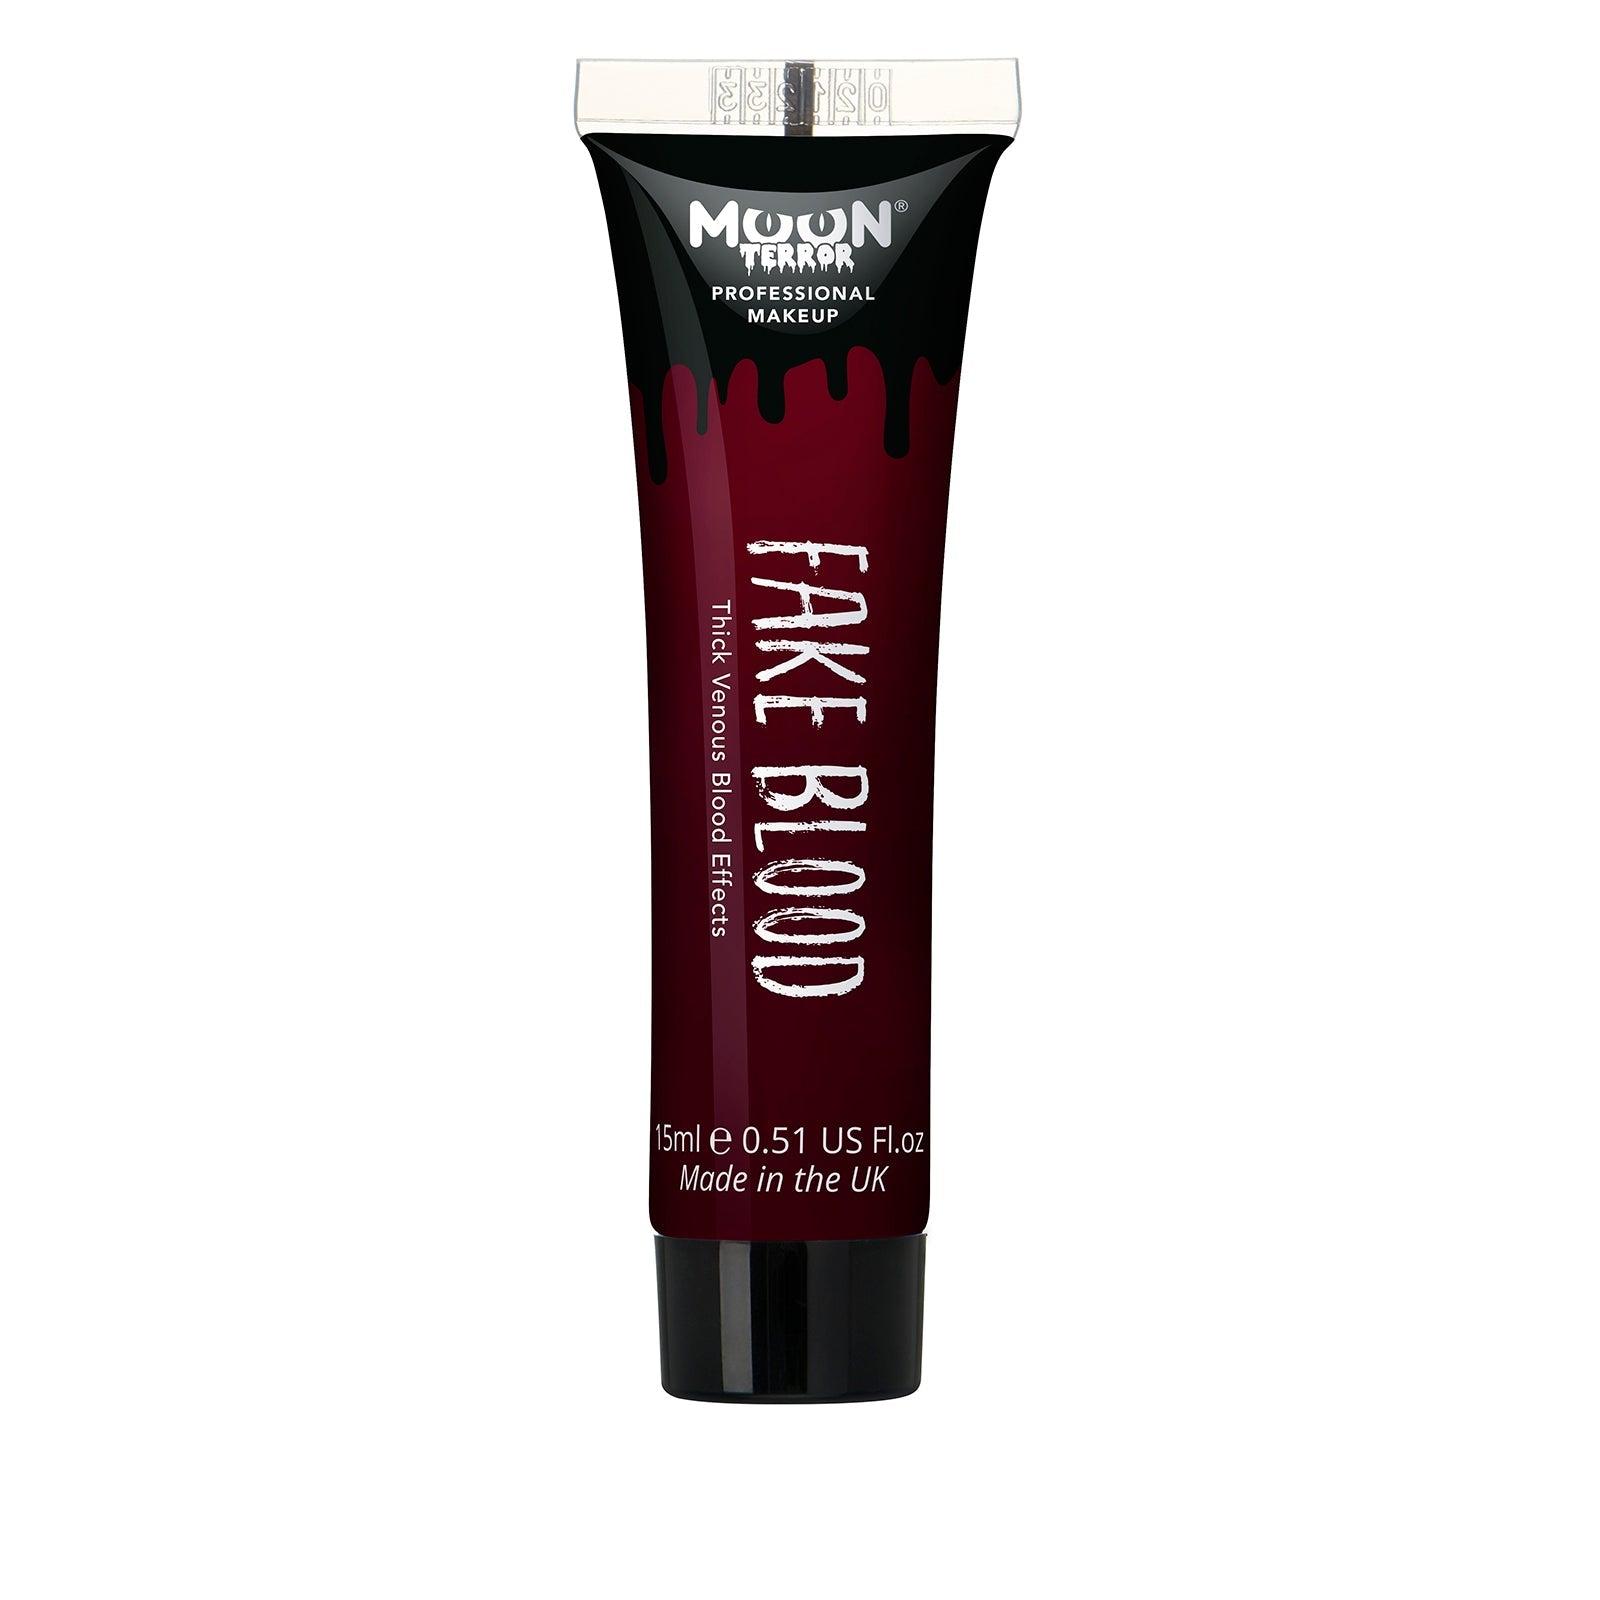 Pro FX Fake Blood. Cosmetically certified, FDA & Health Canada compliant, cruelty free and vegan.